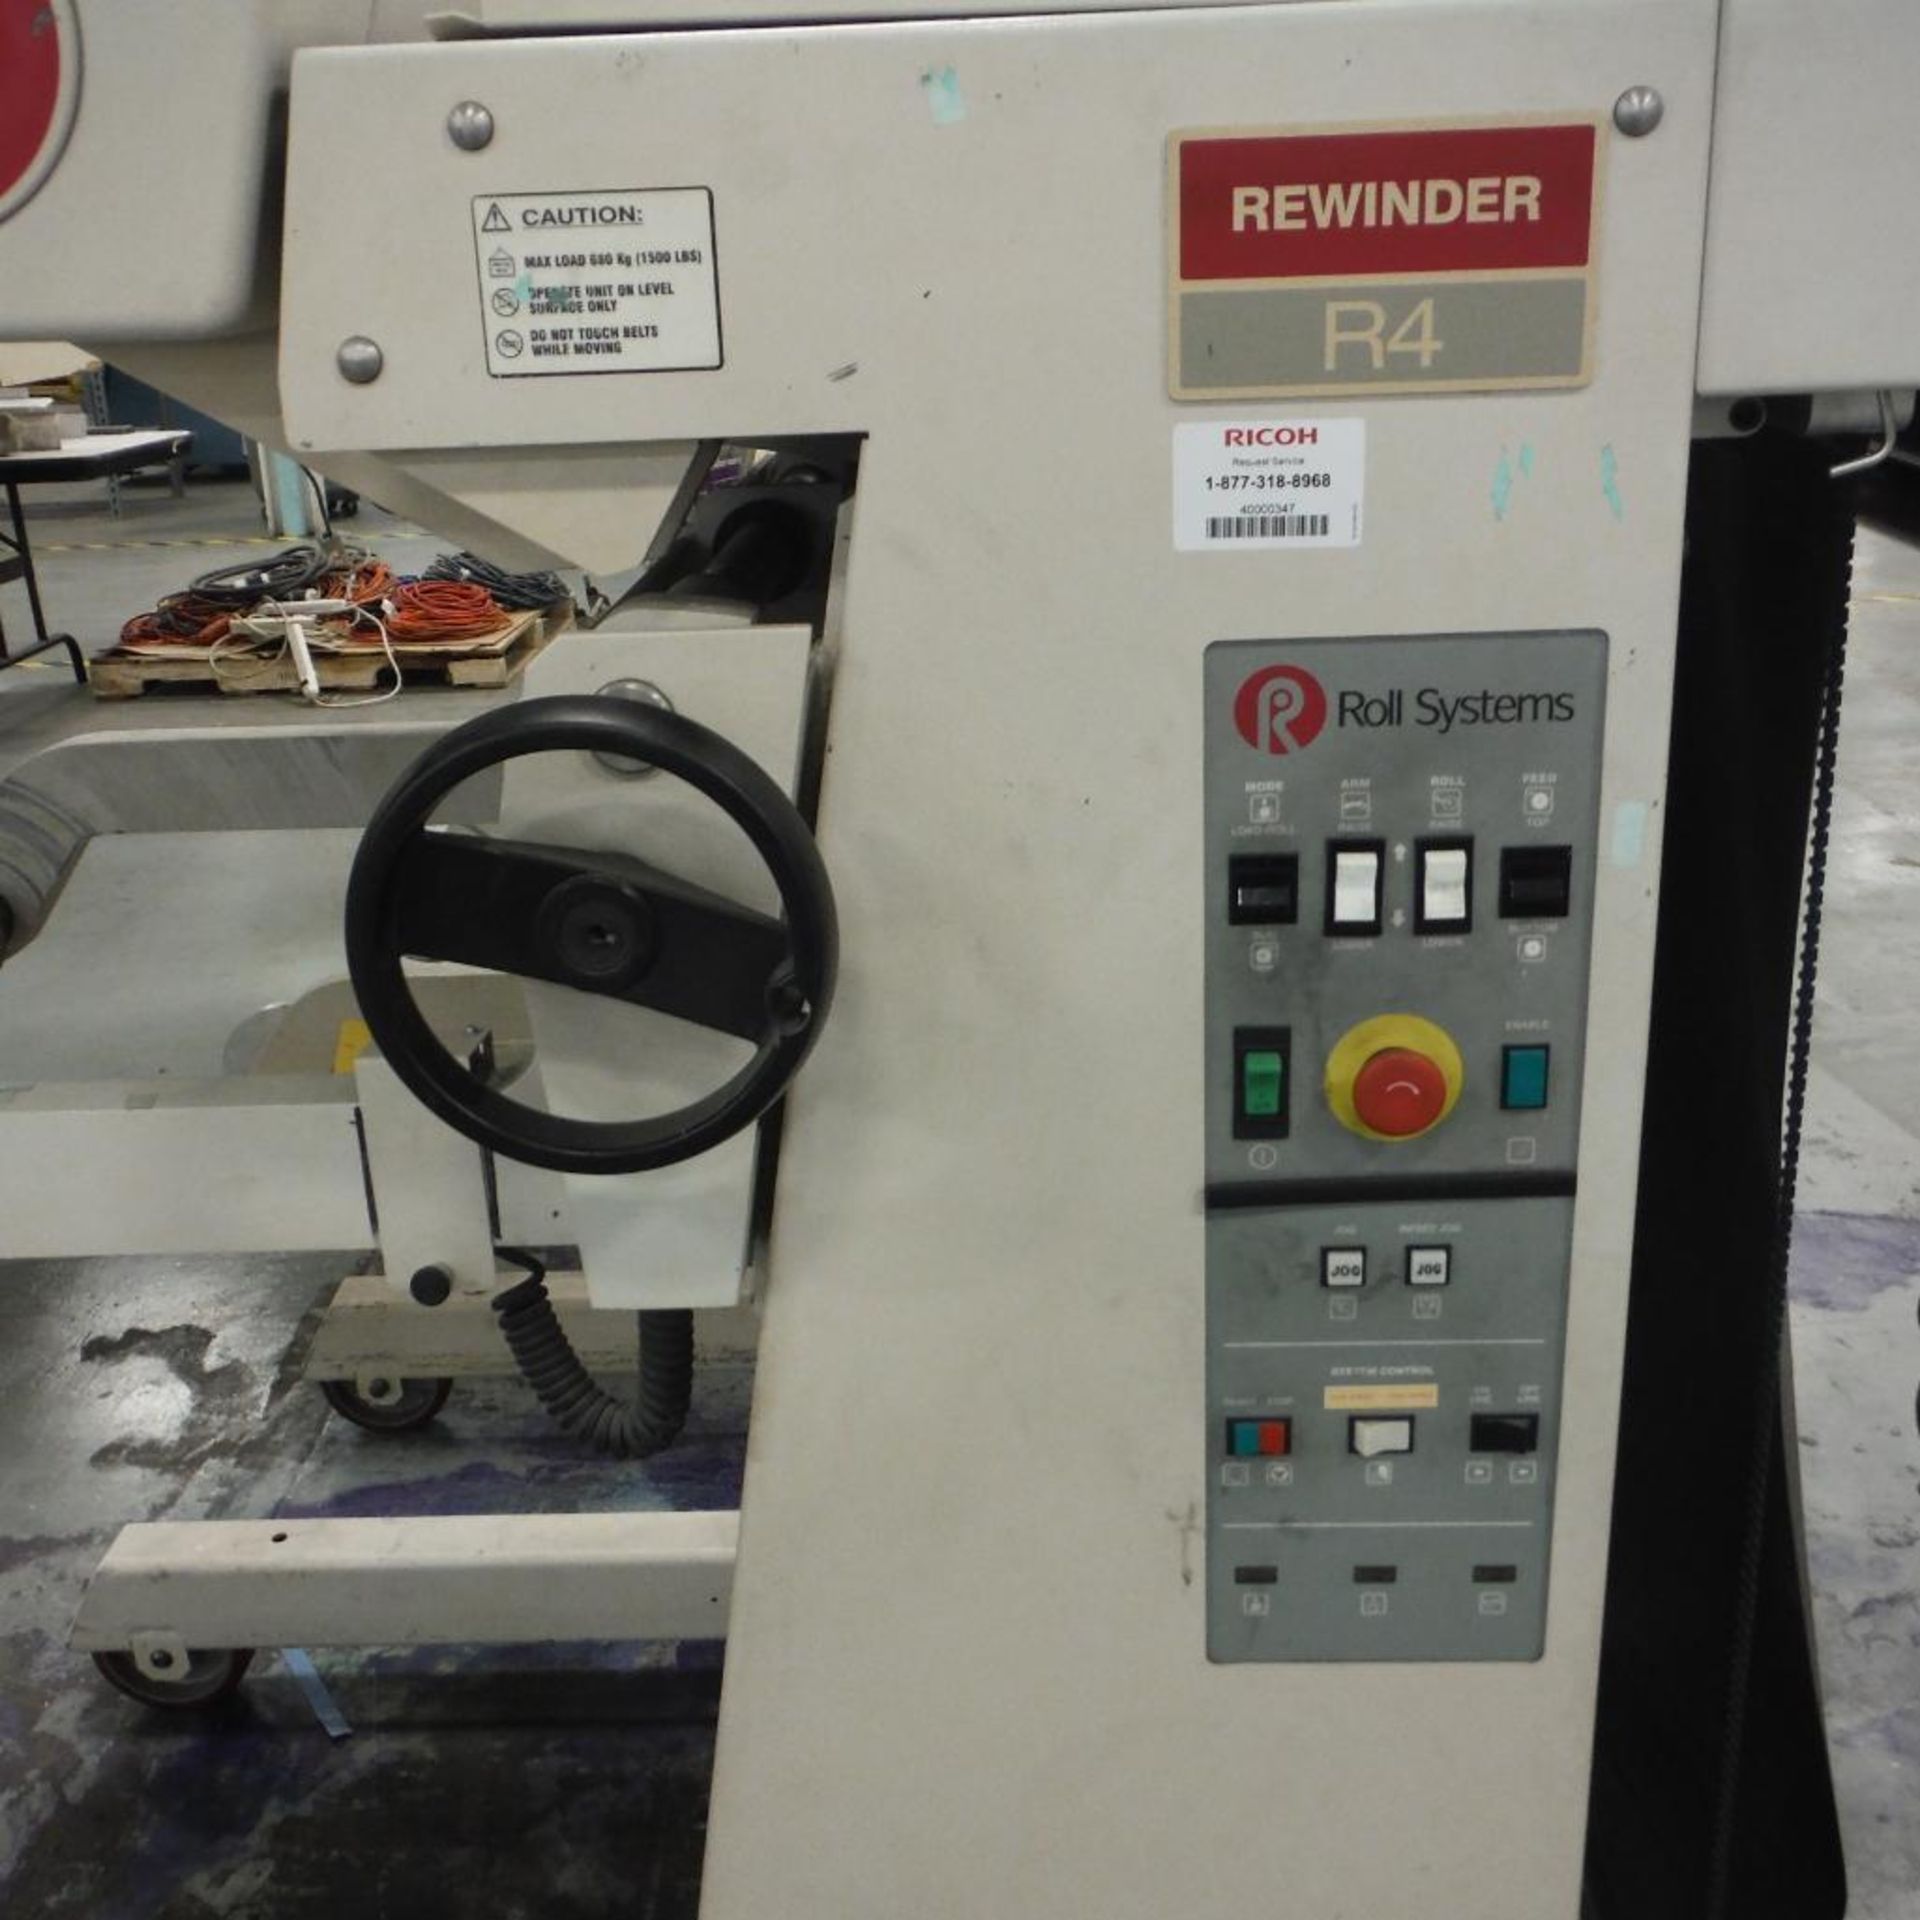 Roll Systems Model 800190 Rewinder, S/N 0303800190E019825 - Image 2 of 4